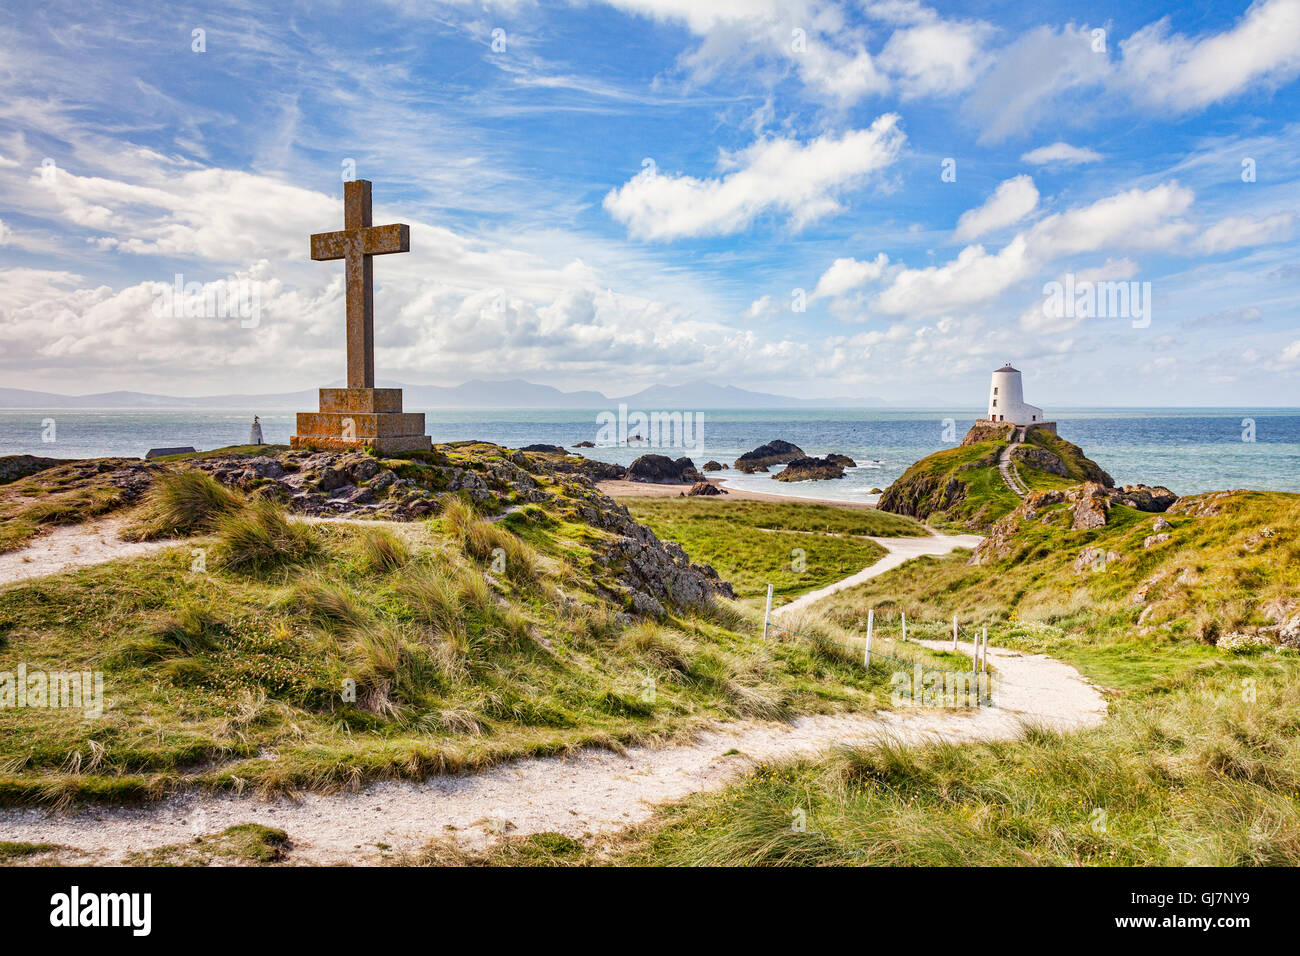 A large Christian cross and Twr Mawr, the old lighthouse on the tidal island of Ynys Llanddwyn, Newborough, Anglesey, Wales, UK Stock Photo